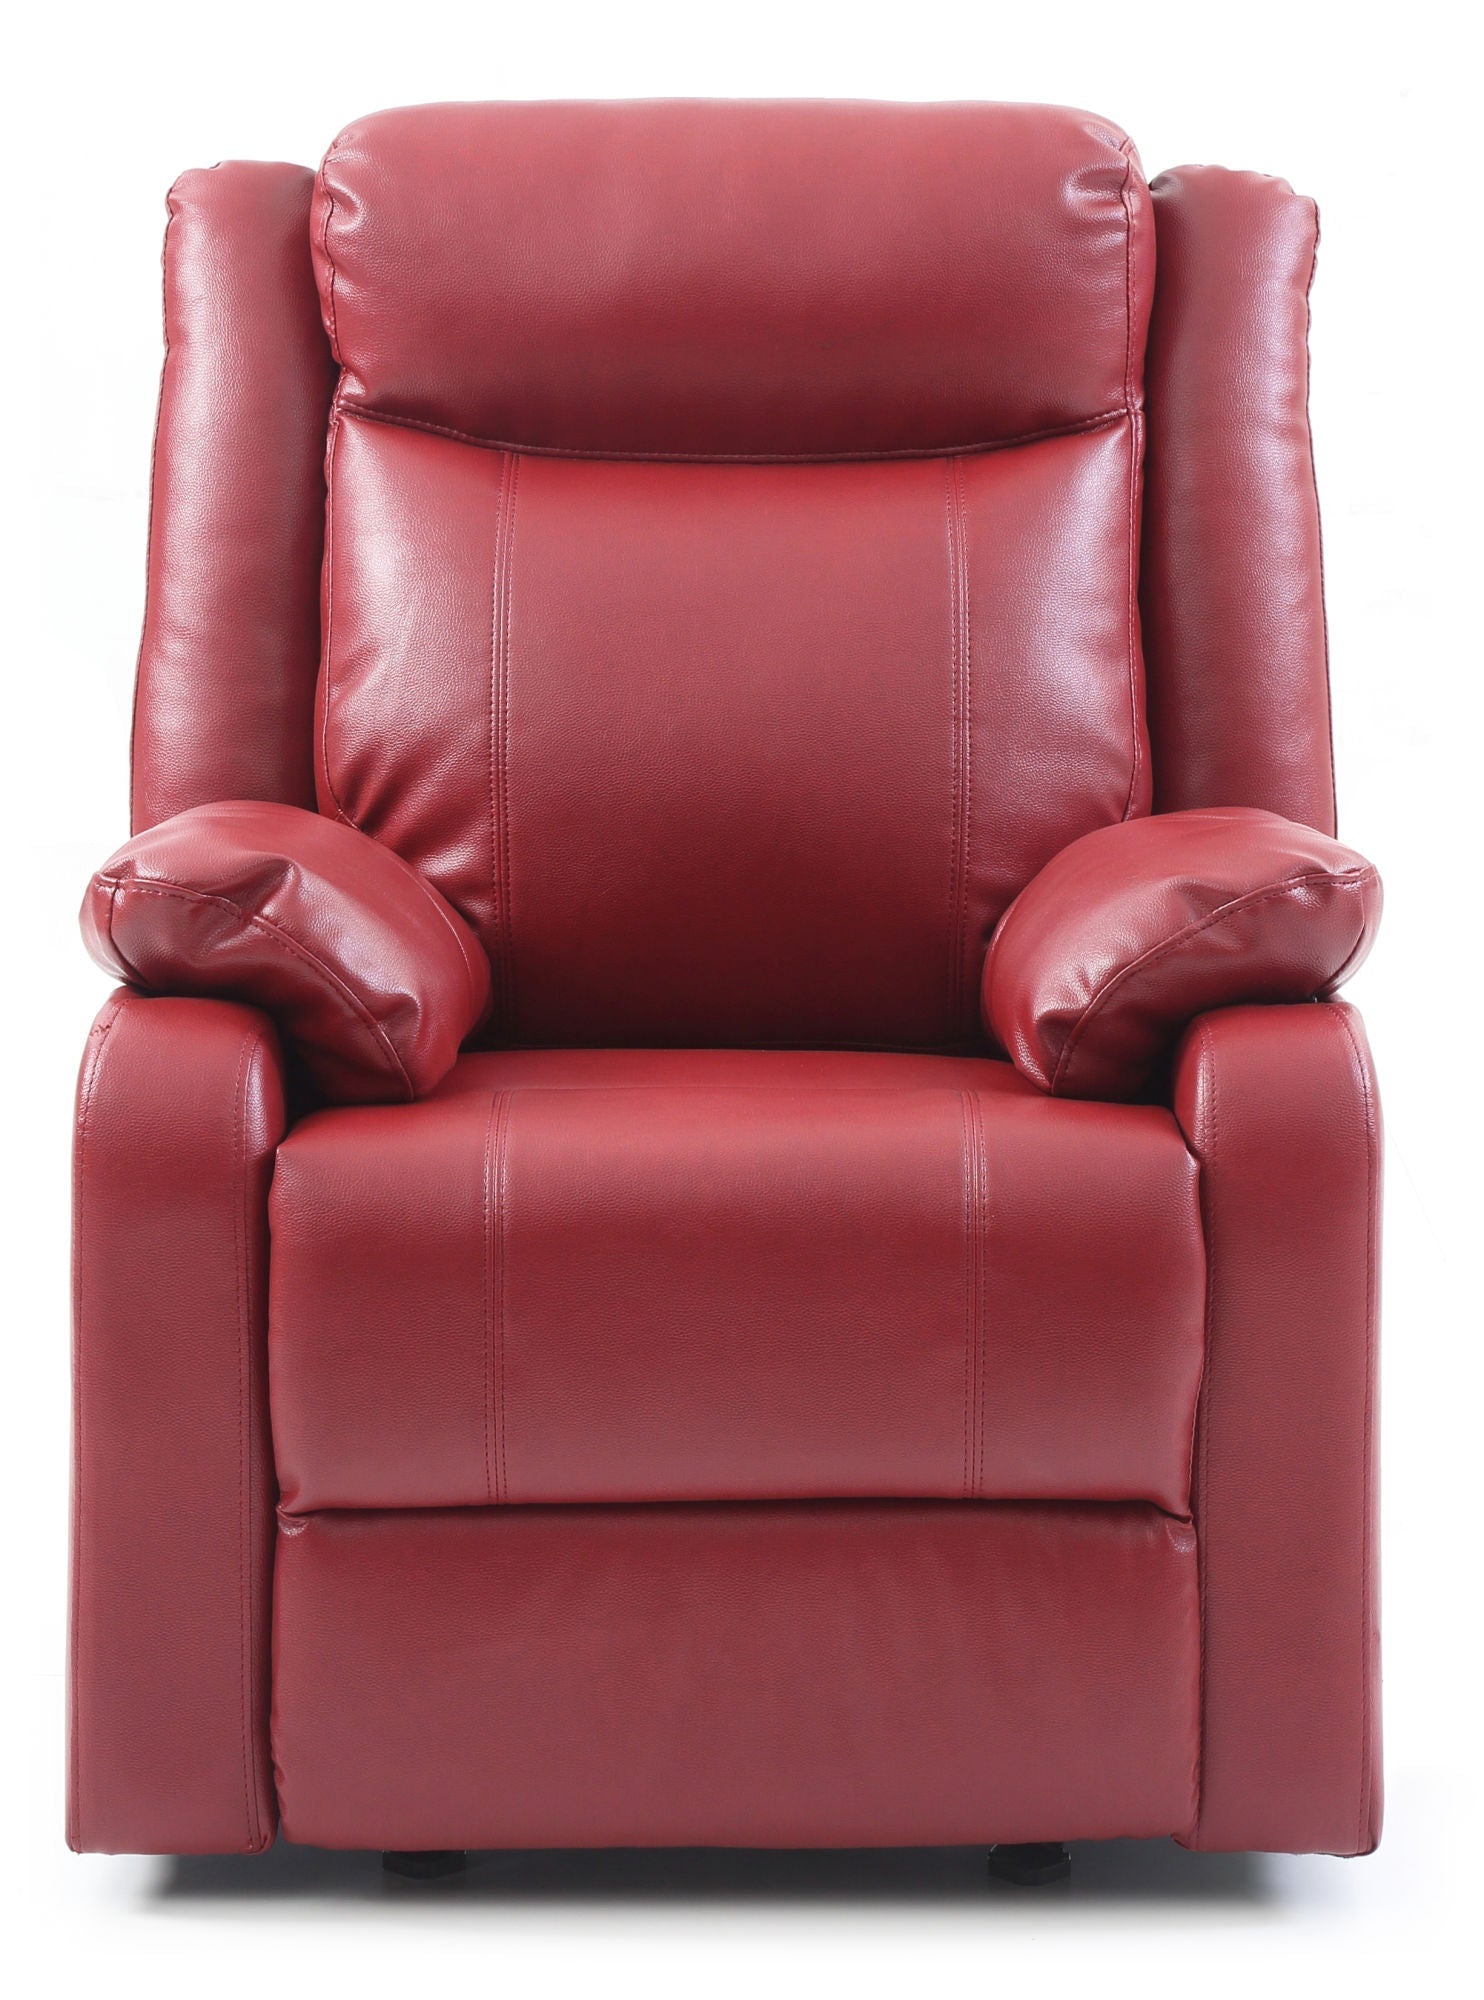 Glory Furniture Ward G765A-RC Rocker Recliner , RED Home Decor by Design